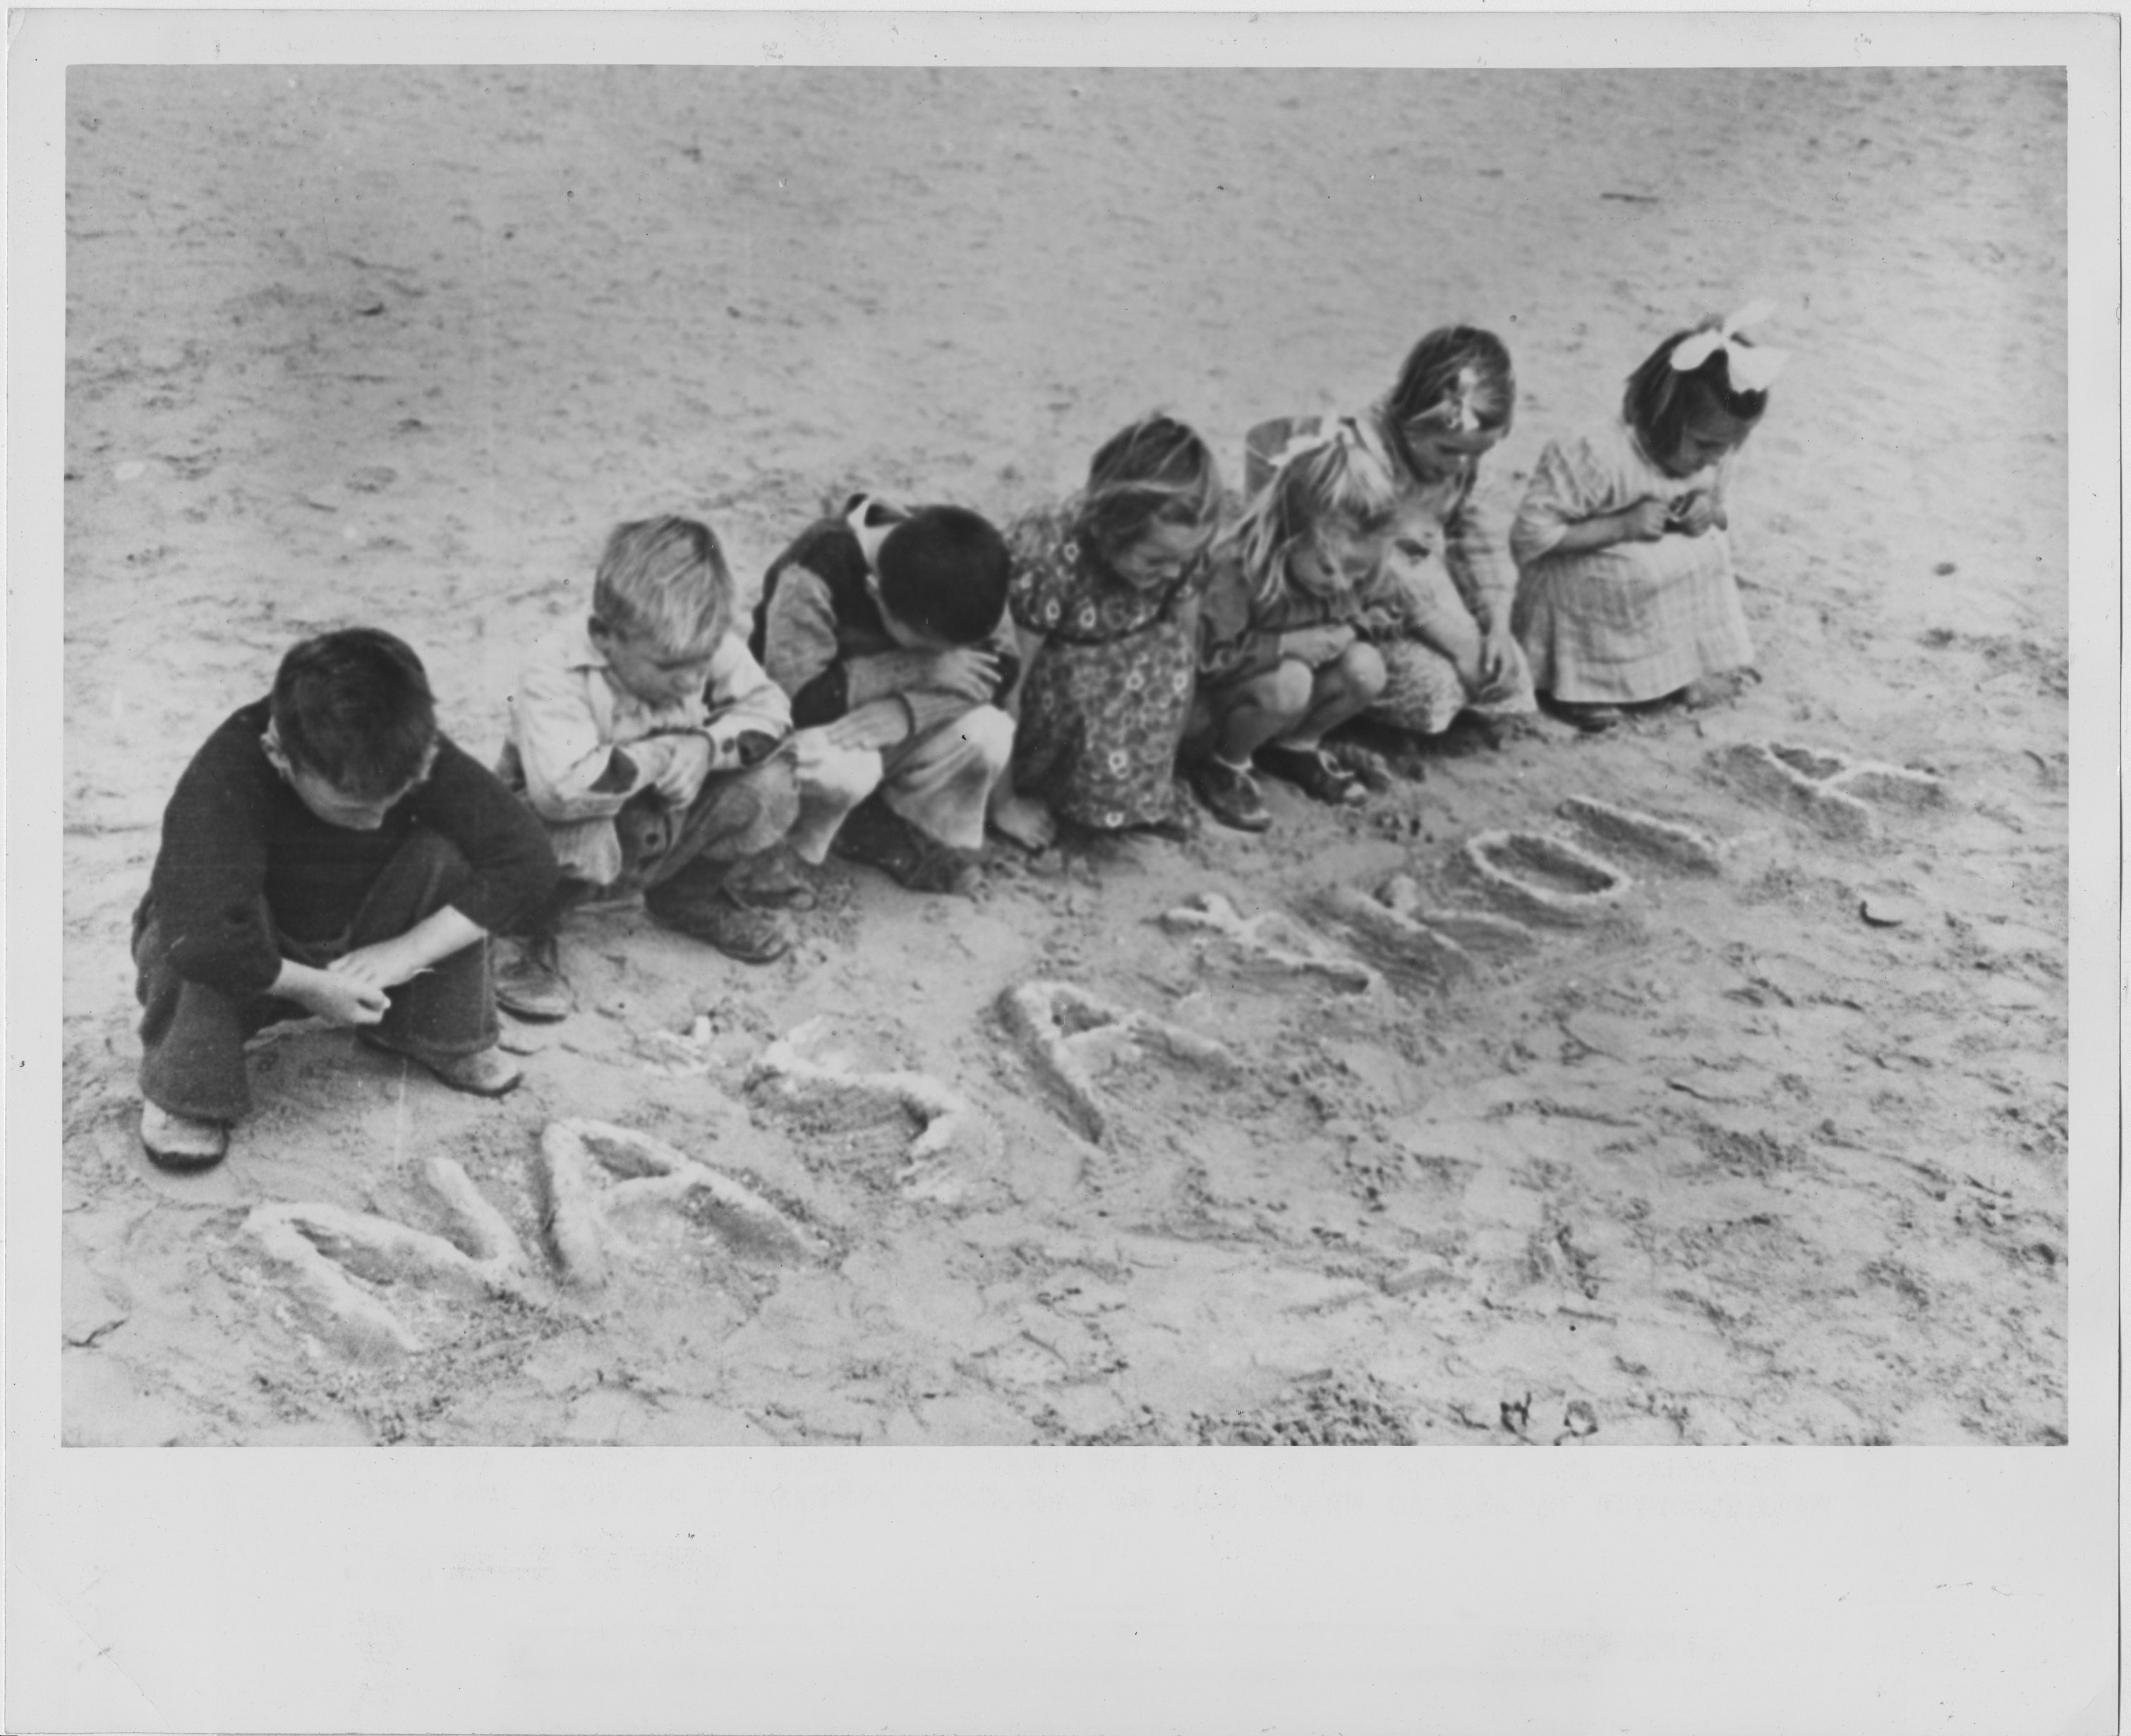 A line of seven young children squat down in sand. They are not looking at the camera, but at letters moulded into the sand in front of them: NAŠA ŠKOLA [our school]